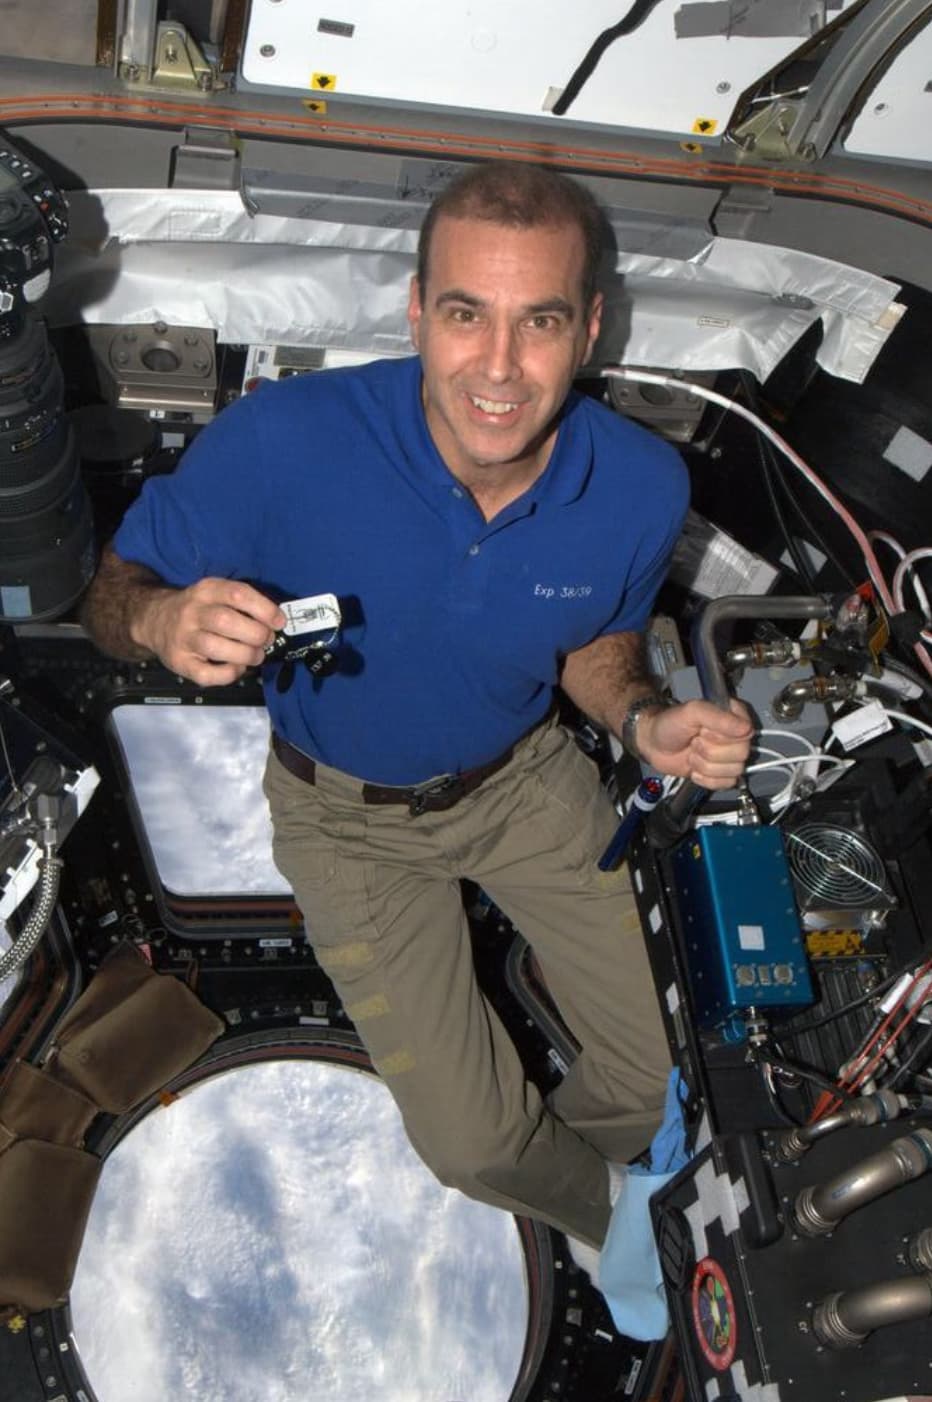 space station geocache - Exp 3839